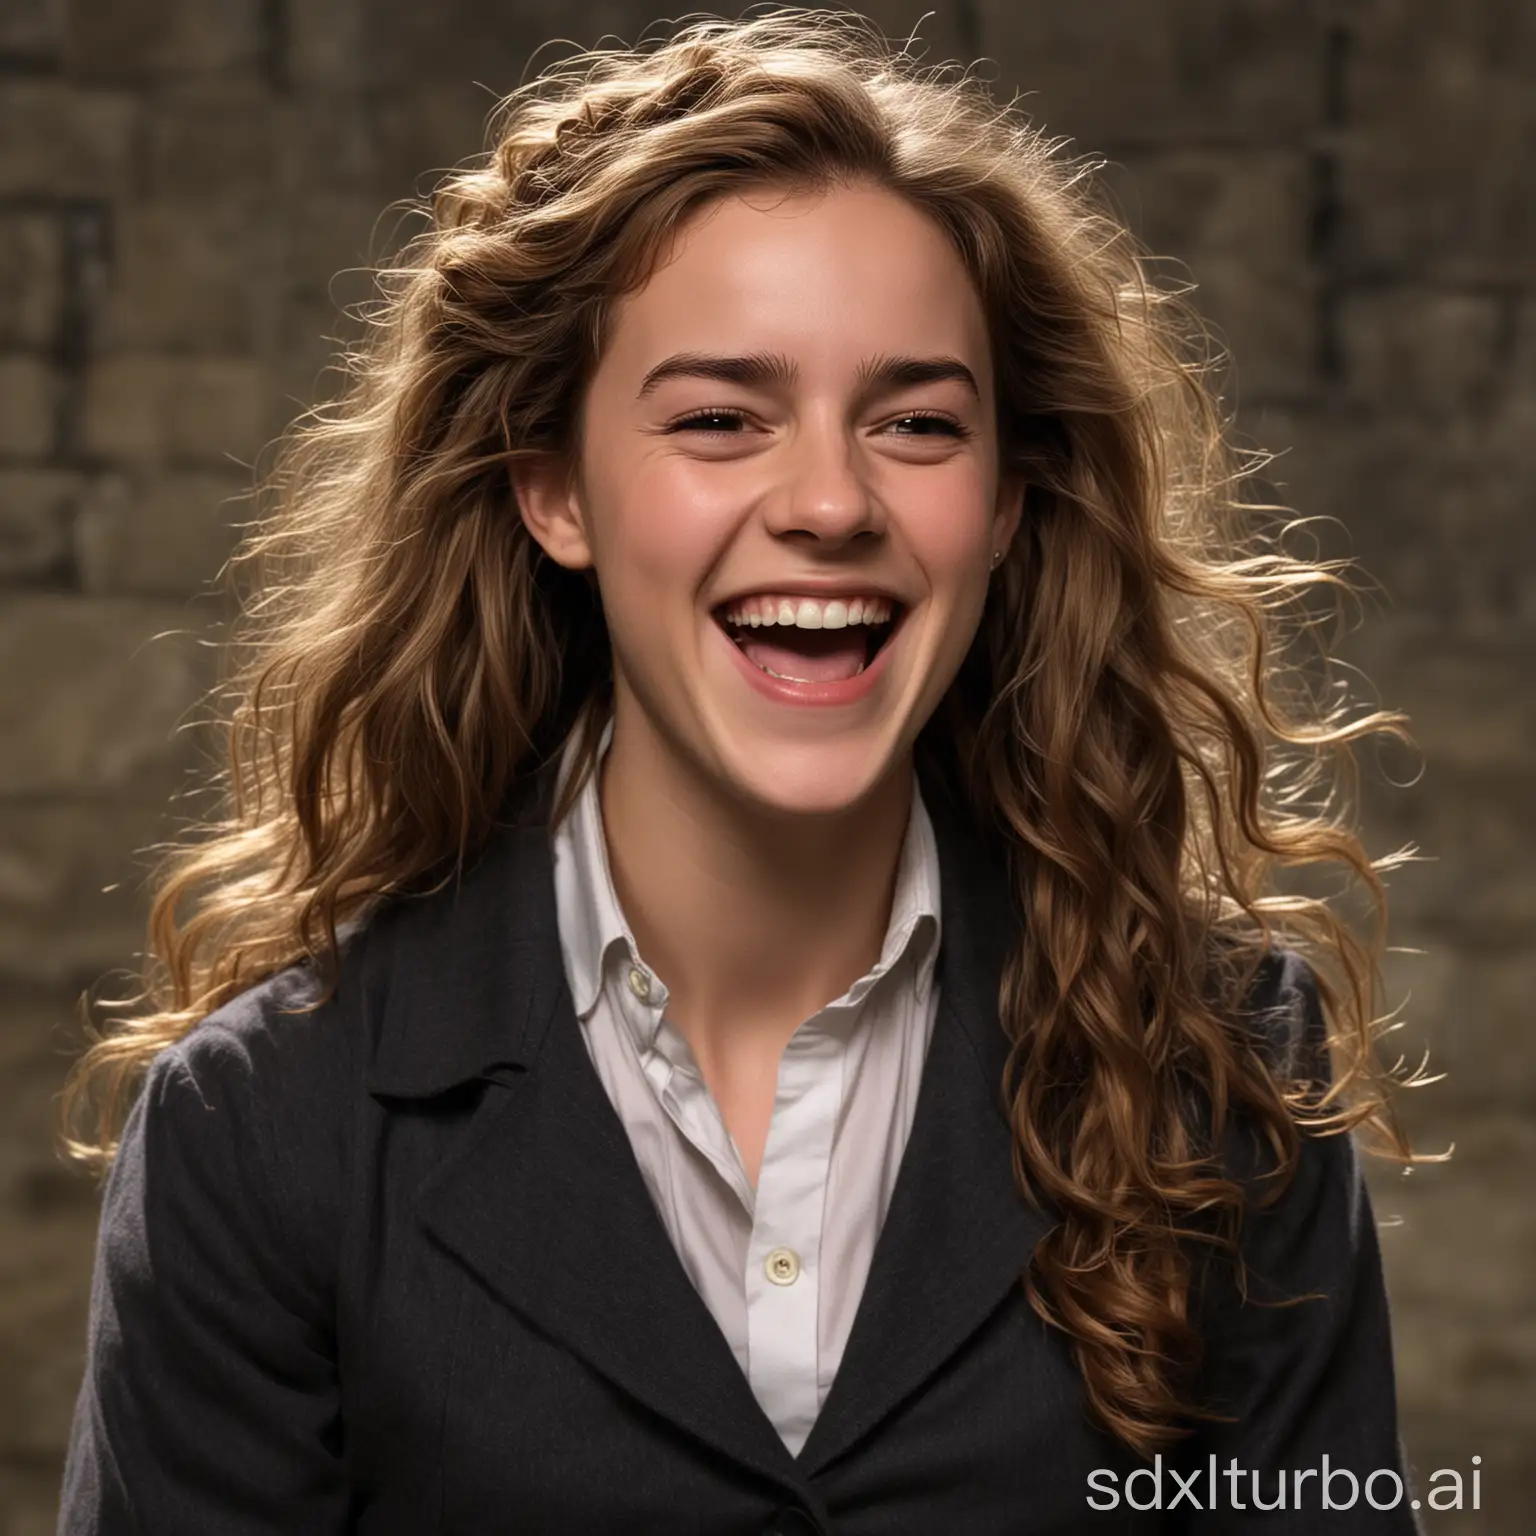 Hermione-Granger-Laughing-Joyful-Expression-of-the-Famous-Witch-from-Harry-Potter-Series